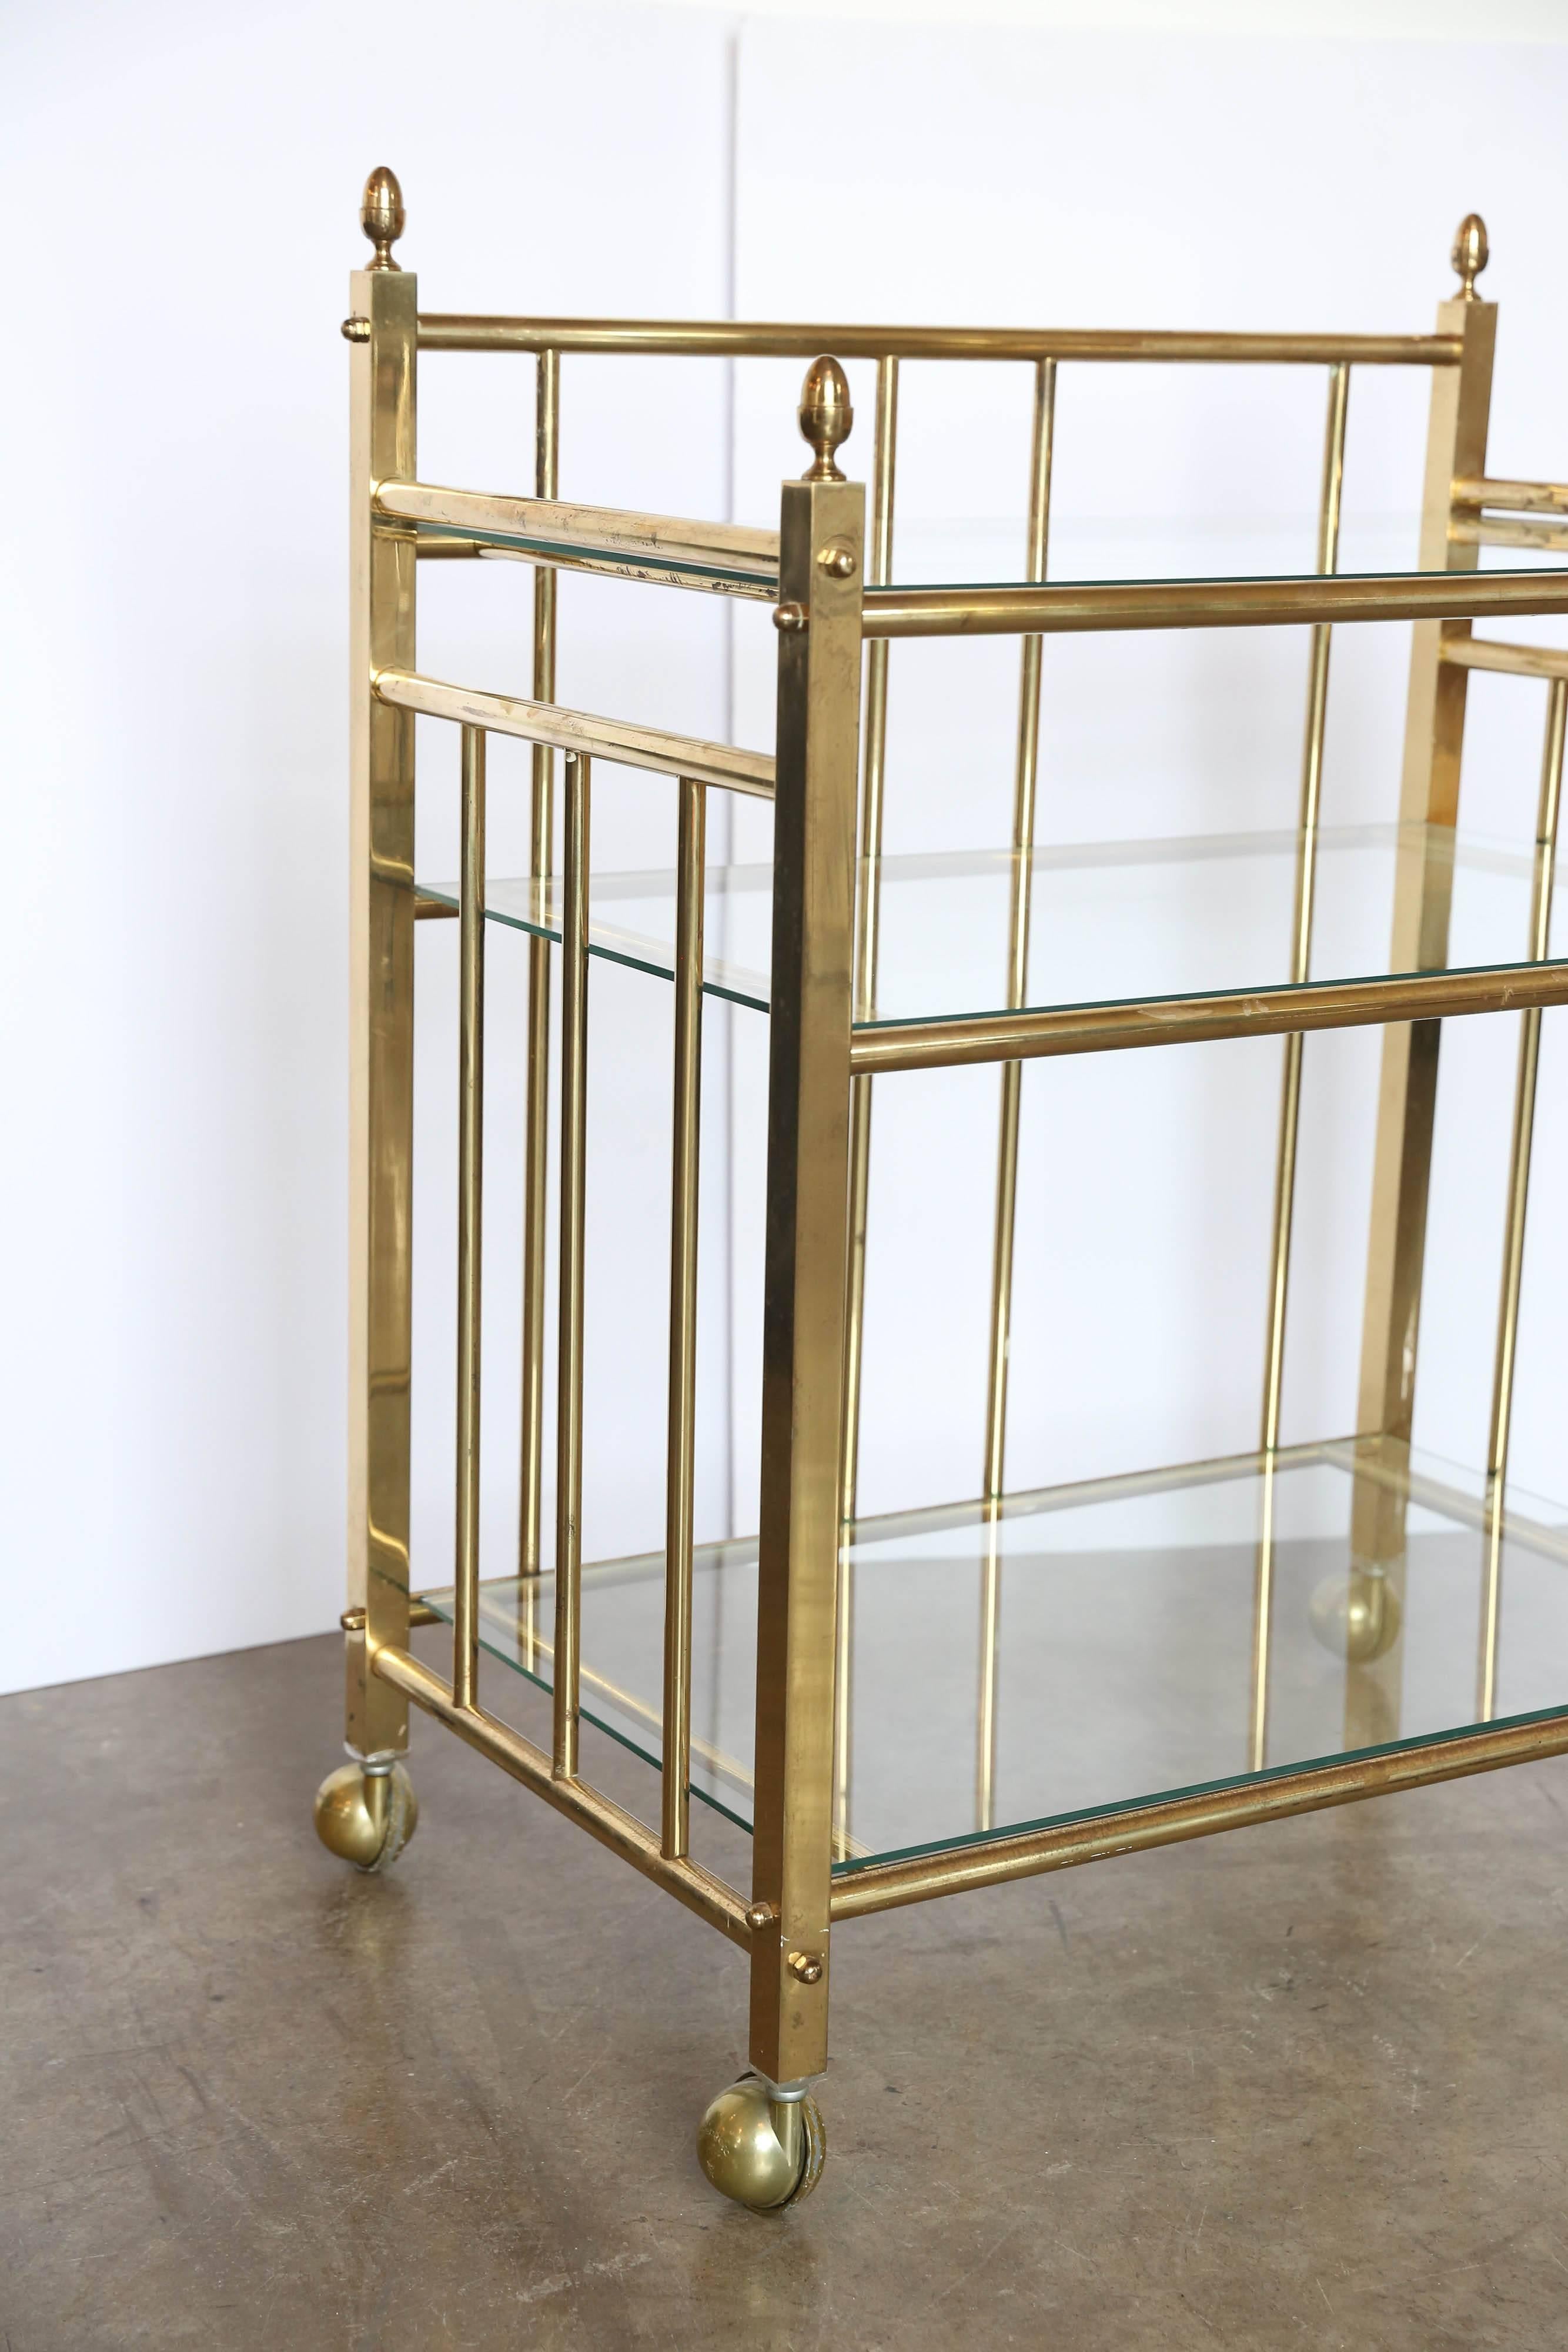 Offered is a Classic regency style brass and three tier glass bar cart with decorative acorn brass finials and brass rollers. This piece is as good looking as it is versatile and would compliment any space.